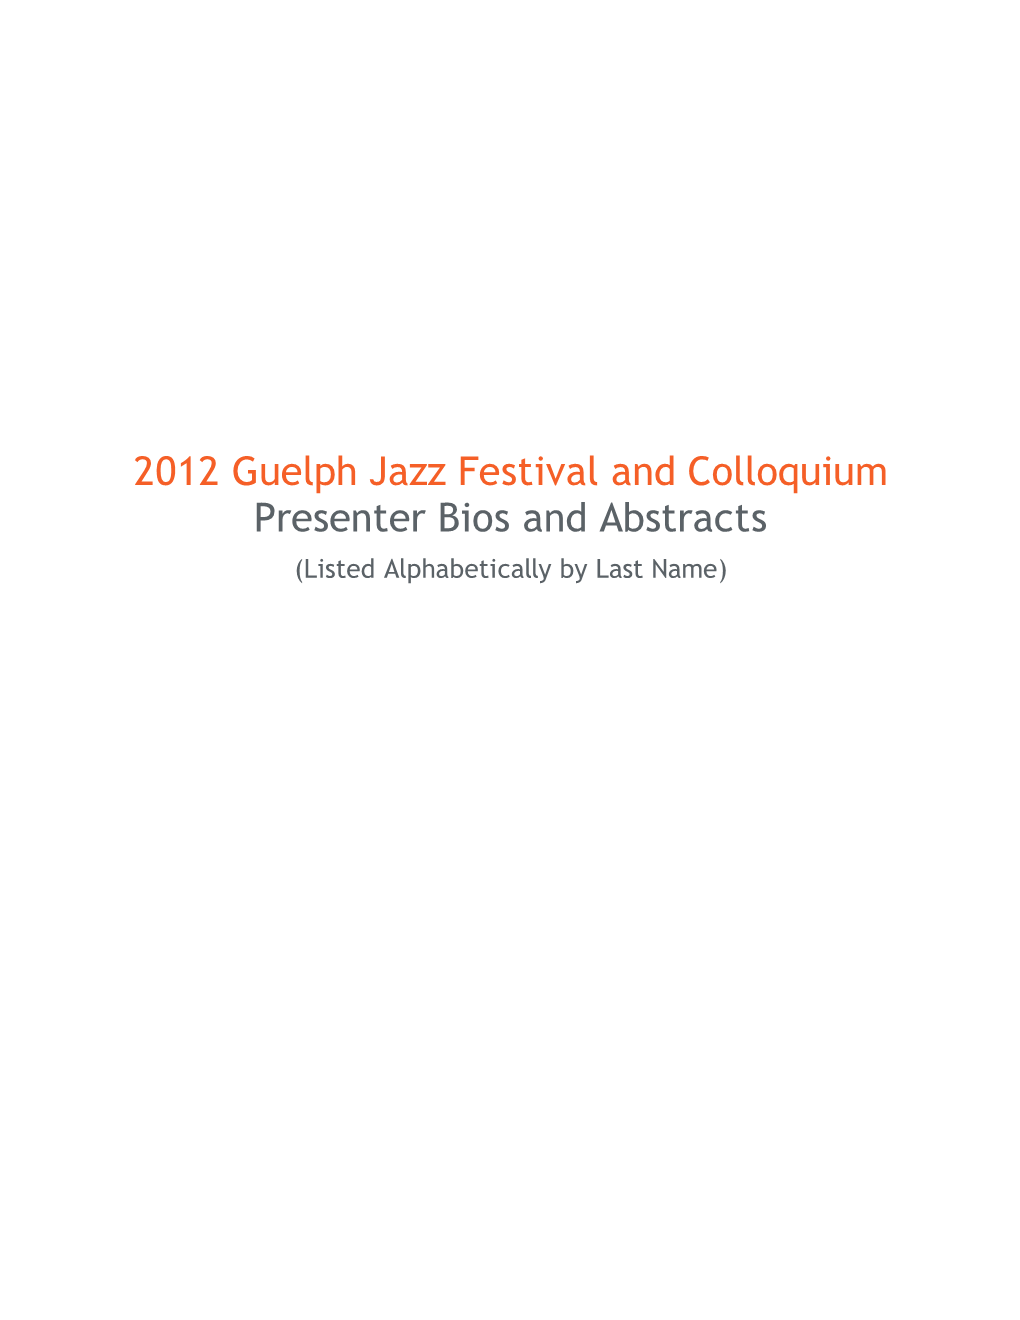 2012 Guelph Jazz Festival and Colloquium Presenter Bios and Abstracts (Listed Alphabetically by Last Name)